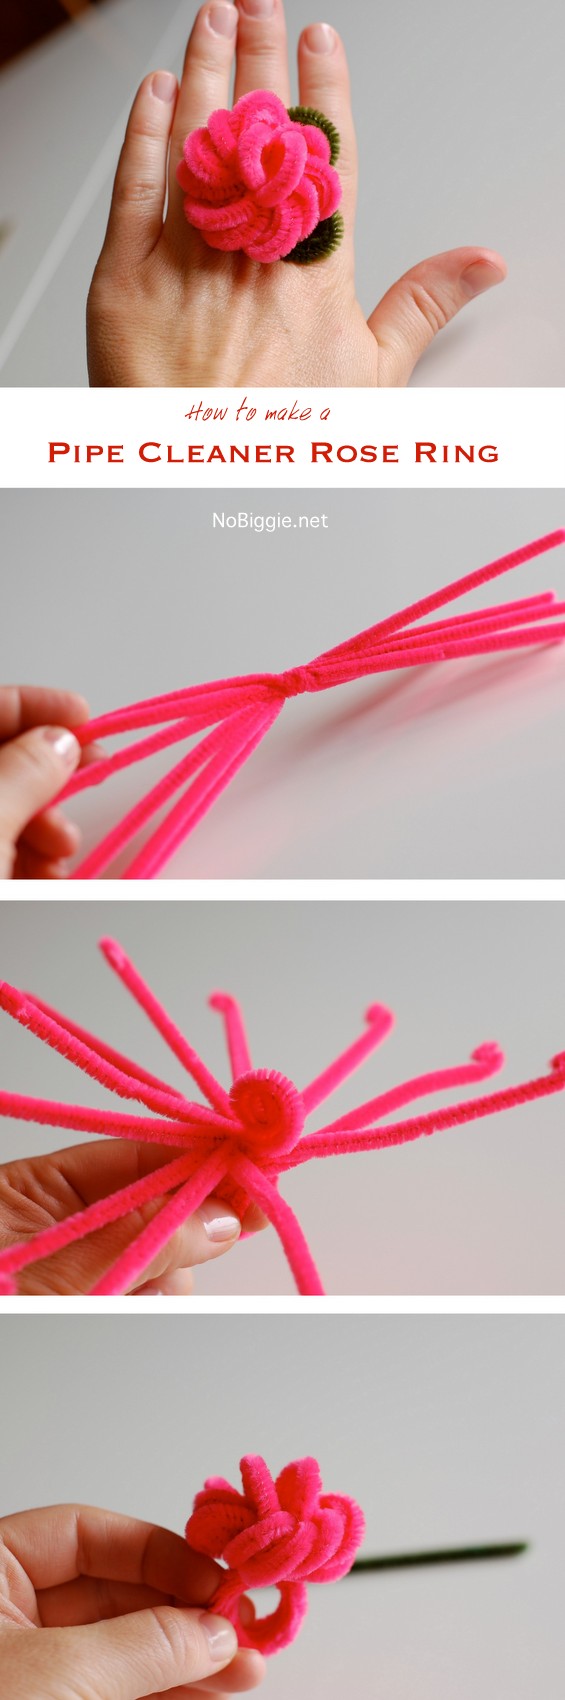 How to make a pipe cleaner rose ring | These make cute gifts | NoBiggie.net